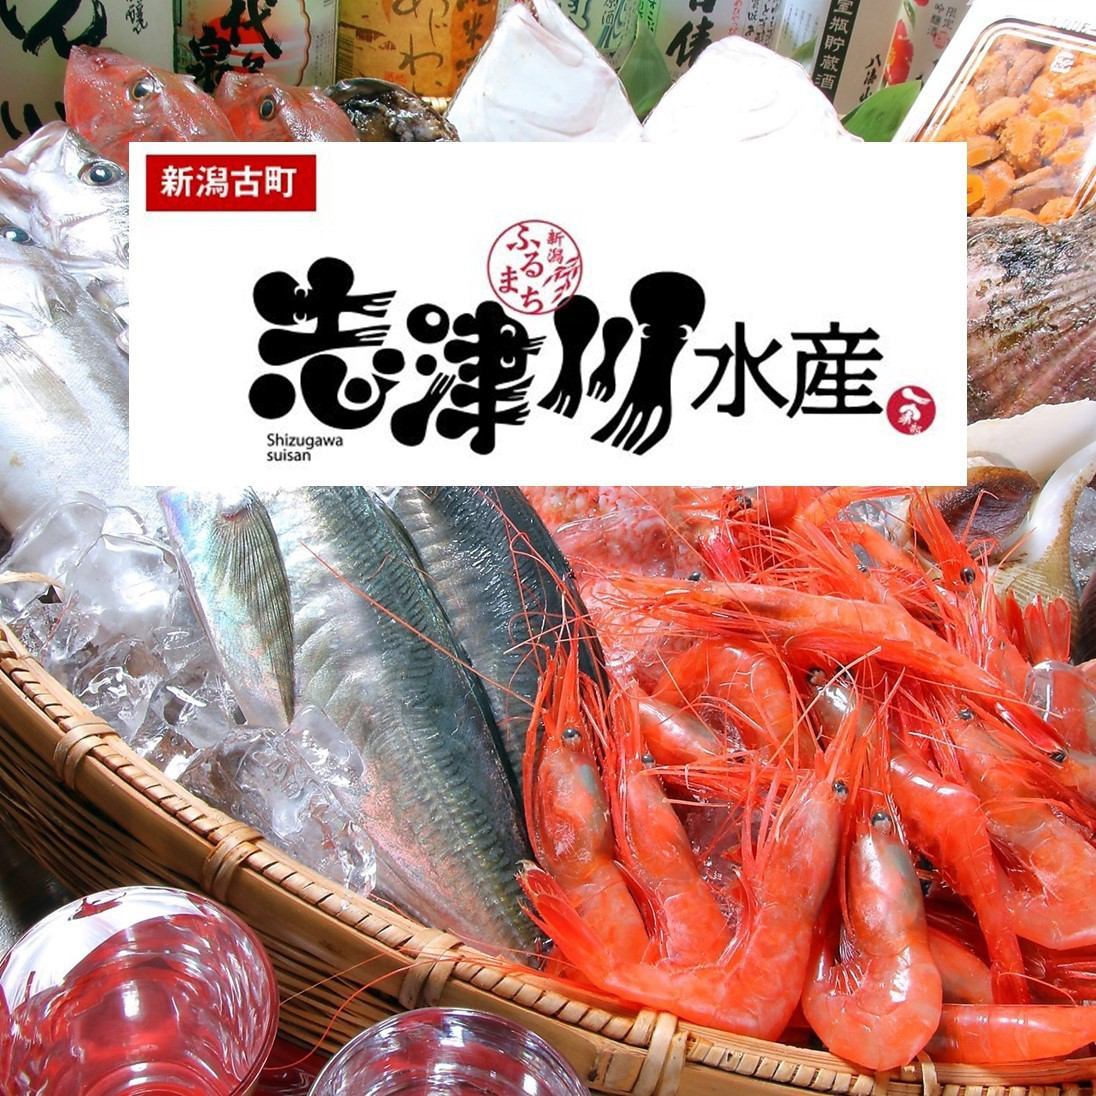 A popular restaurant where you can enjoy ingredients sent directly from Miyagi and Shizugawa, as well as local ingredients from Niigata, mainly seafood.